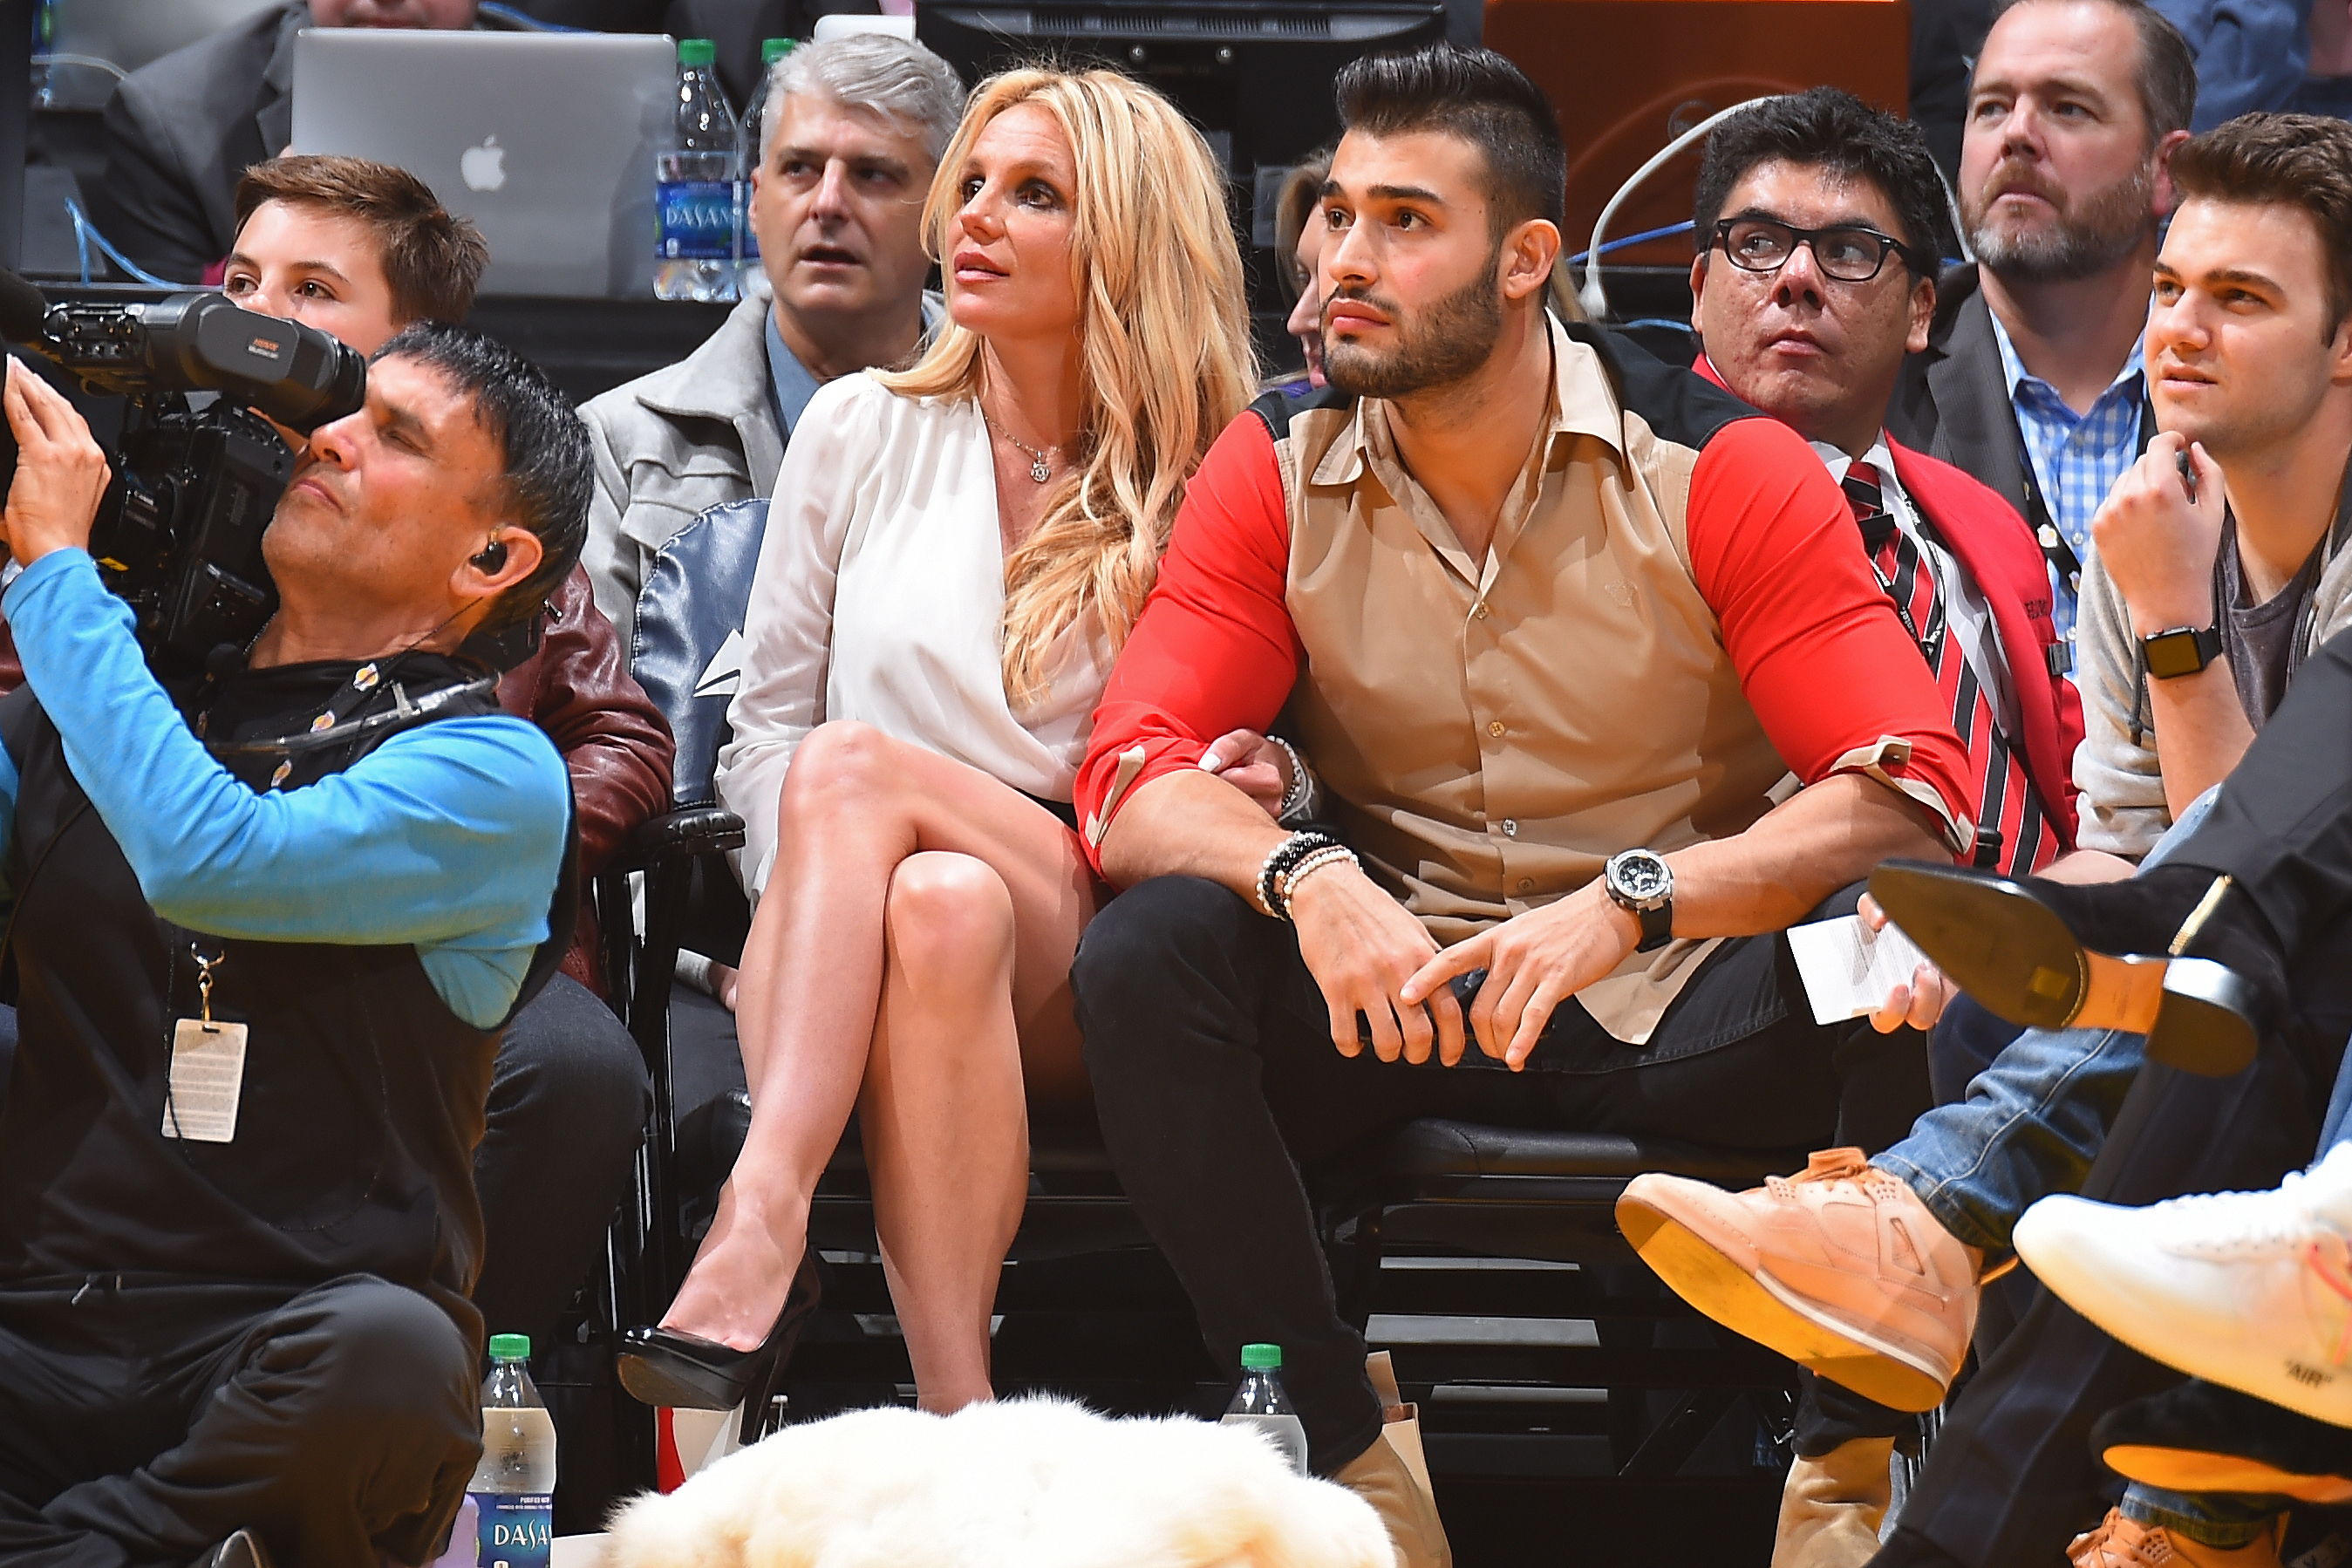 Britney Spears and Sam Asghari look on during the Golden State Warriors game against the Los Angeles Lakers on November 29, 2017, at STAPLES Center in Los Angeles, California | Source: Getty Images